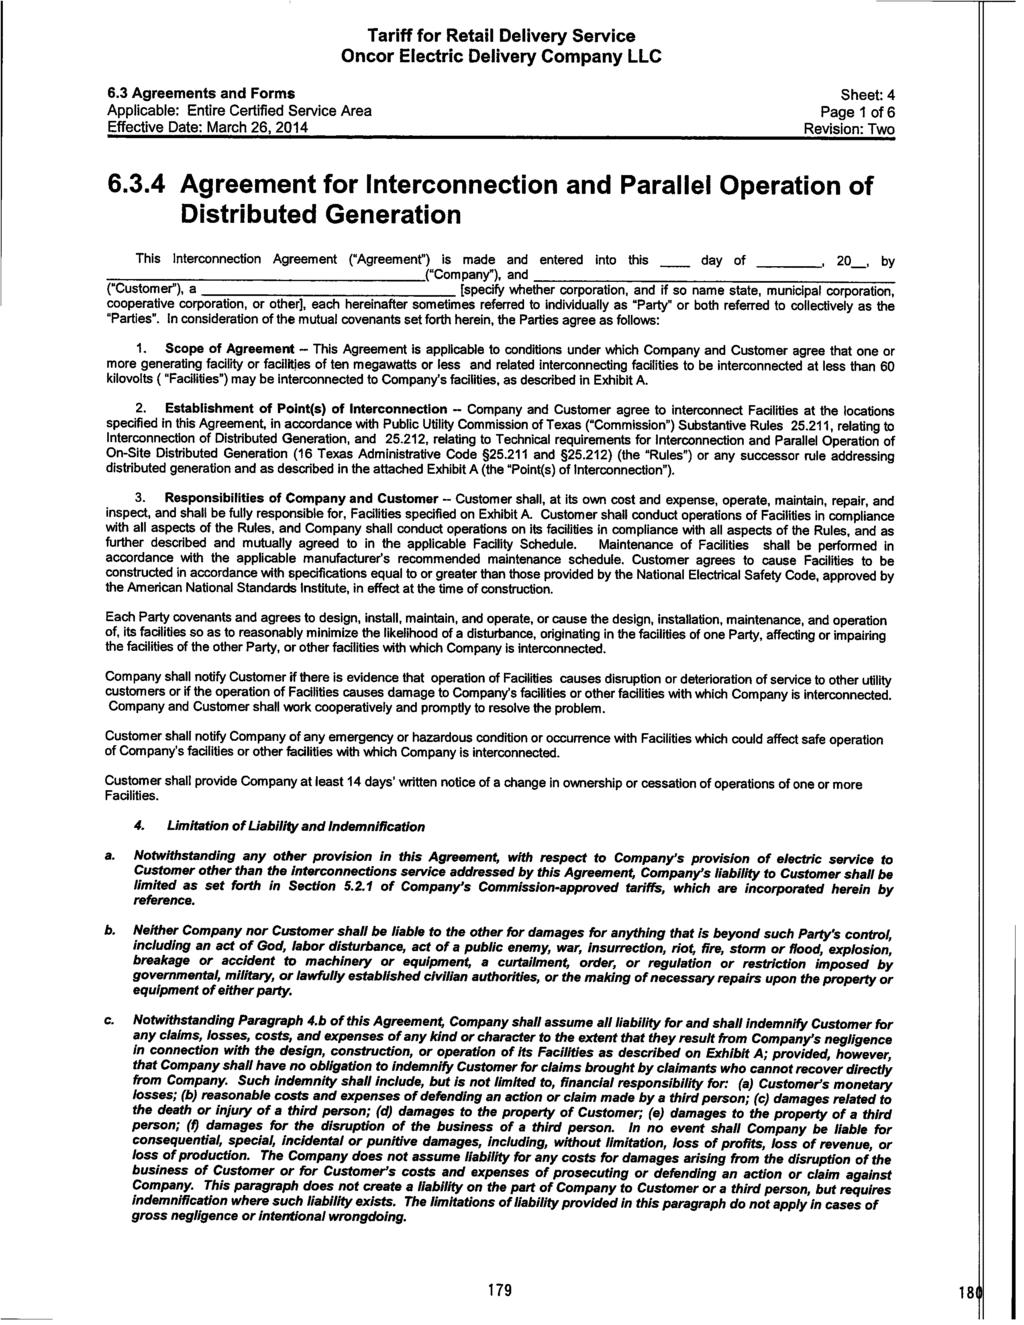 6.3 Agreements and Forms Sheet: 4 Applicable: Entire Certified Service Area Page 1 of 6 Effective Date: March 26, 2014 Revision: Two 6.3.4 Agreement for Interconnection and Parallel Operation of